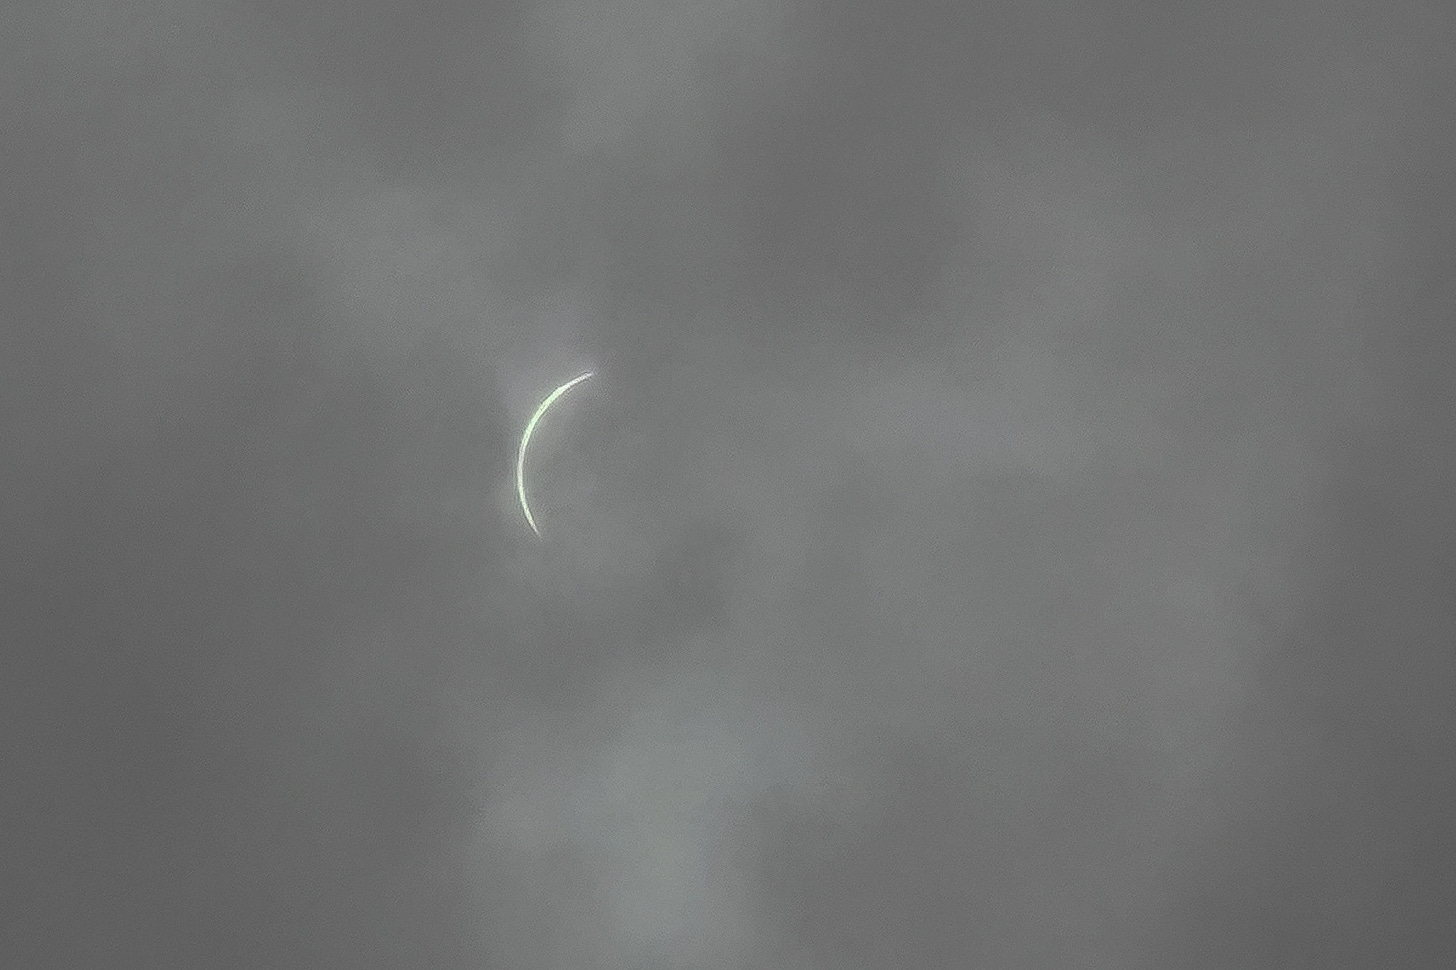 The Total Eclipse of the Sun behind clouds with only one side of the eclipse showing